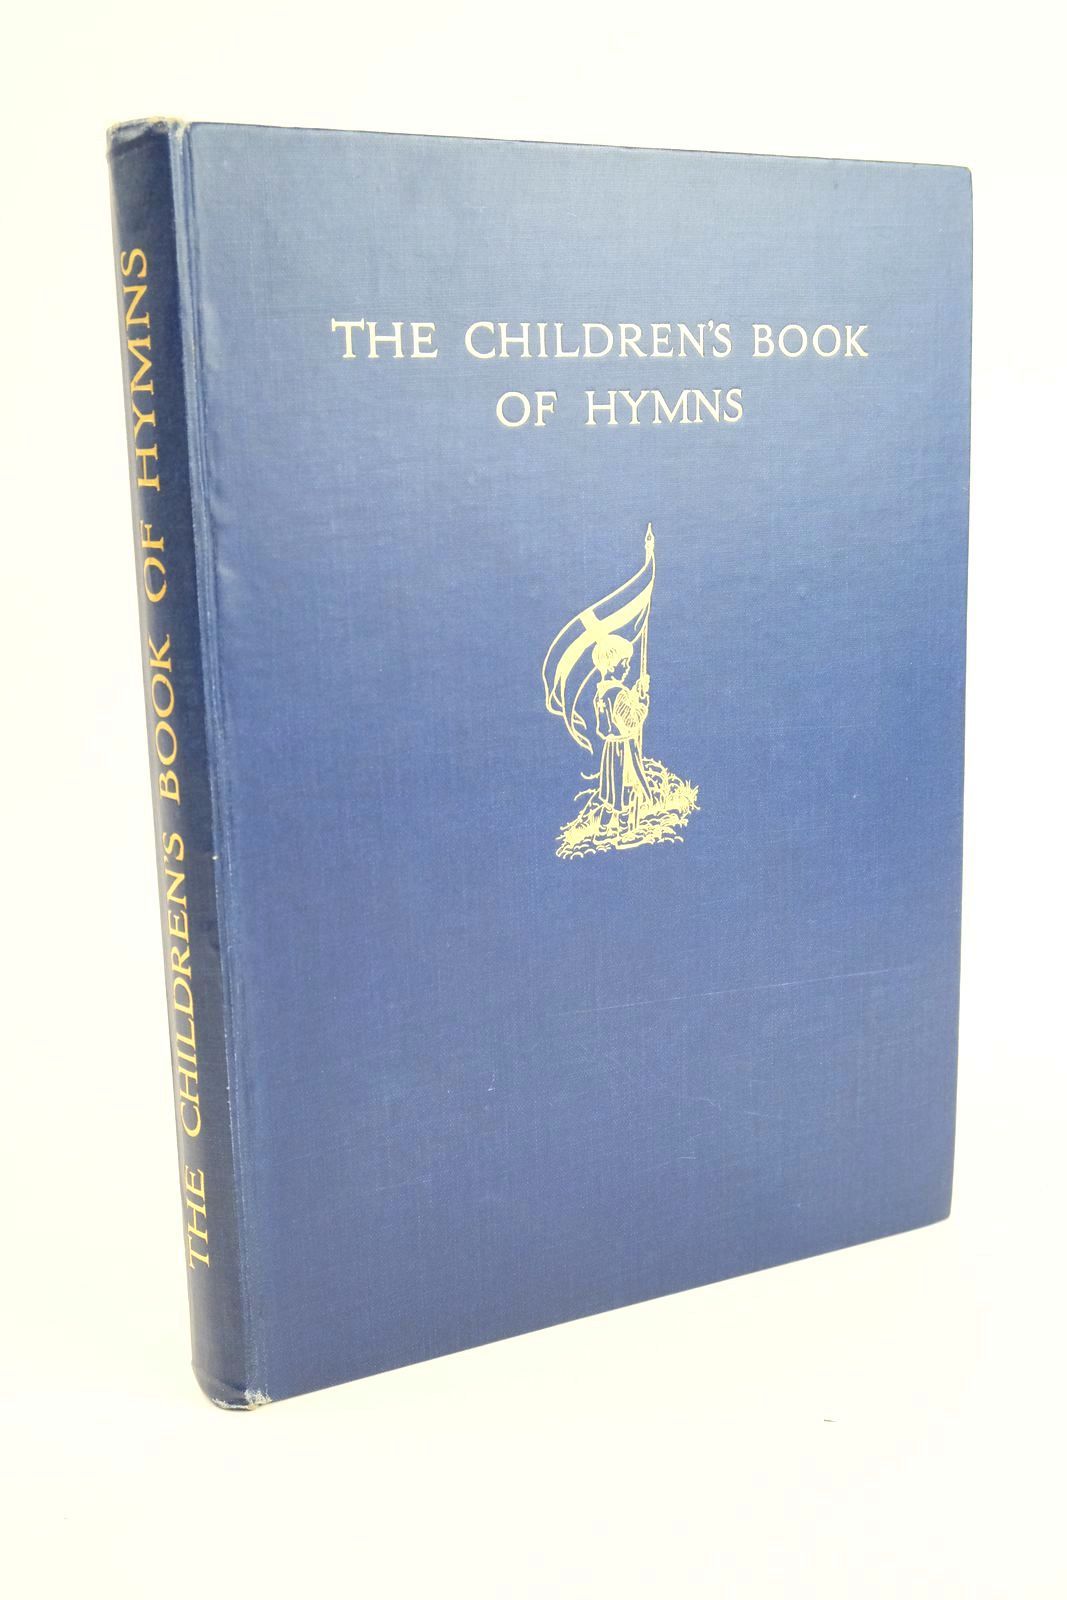 Photo of THE CHILDREN'S BOOK OF HYMNS illustrated by Barker, Cicely Mary published by Blackie &amp; Son Ltd. (STOCK CODE: 1323735)  for sale by Stella & Rose's Books